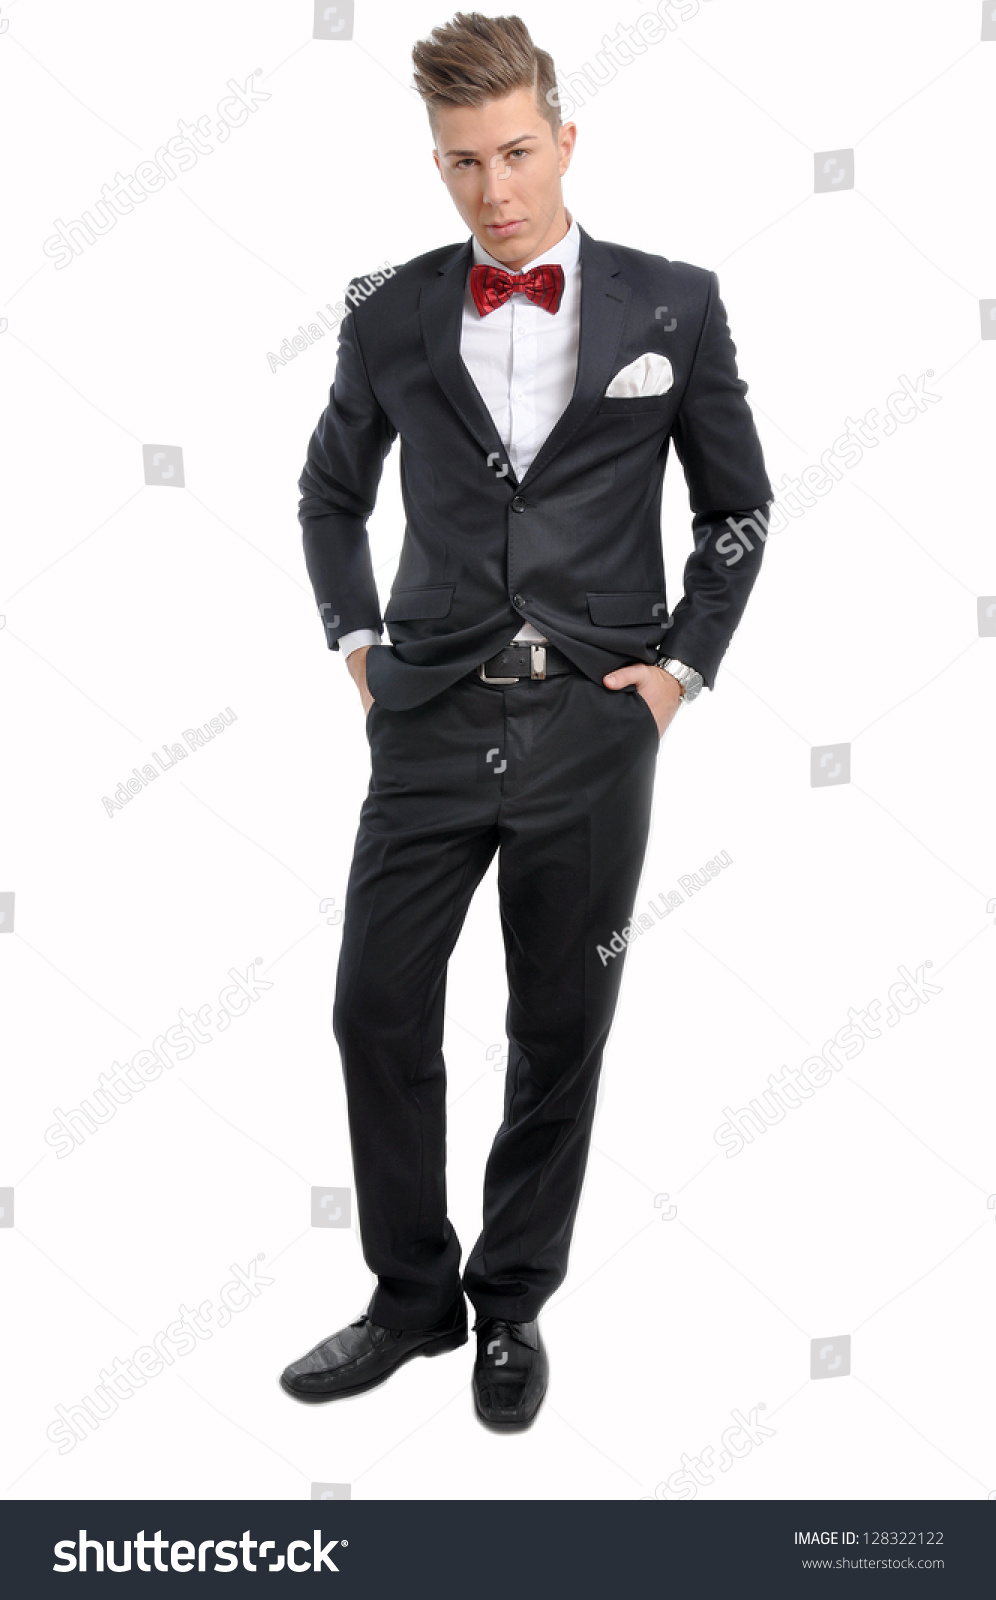 Portrait Young Male Model Red Bow Stock Photo 128322122 - Shutterstock